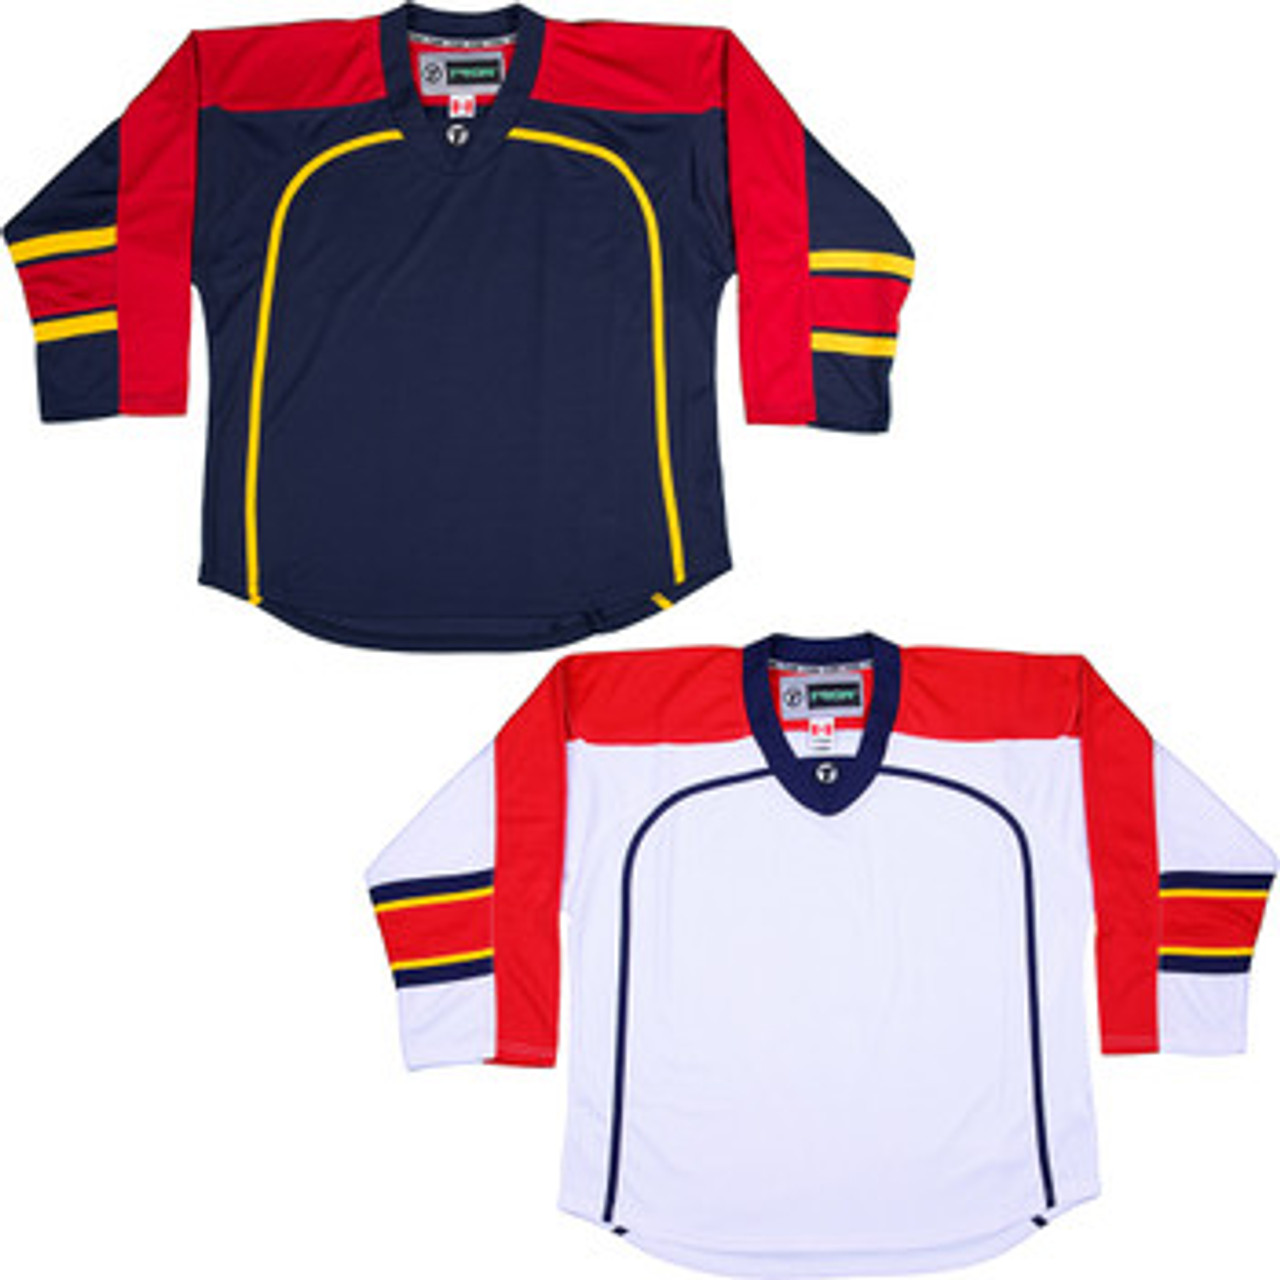 panthers jersey colors